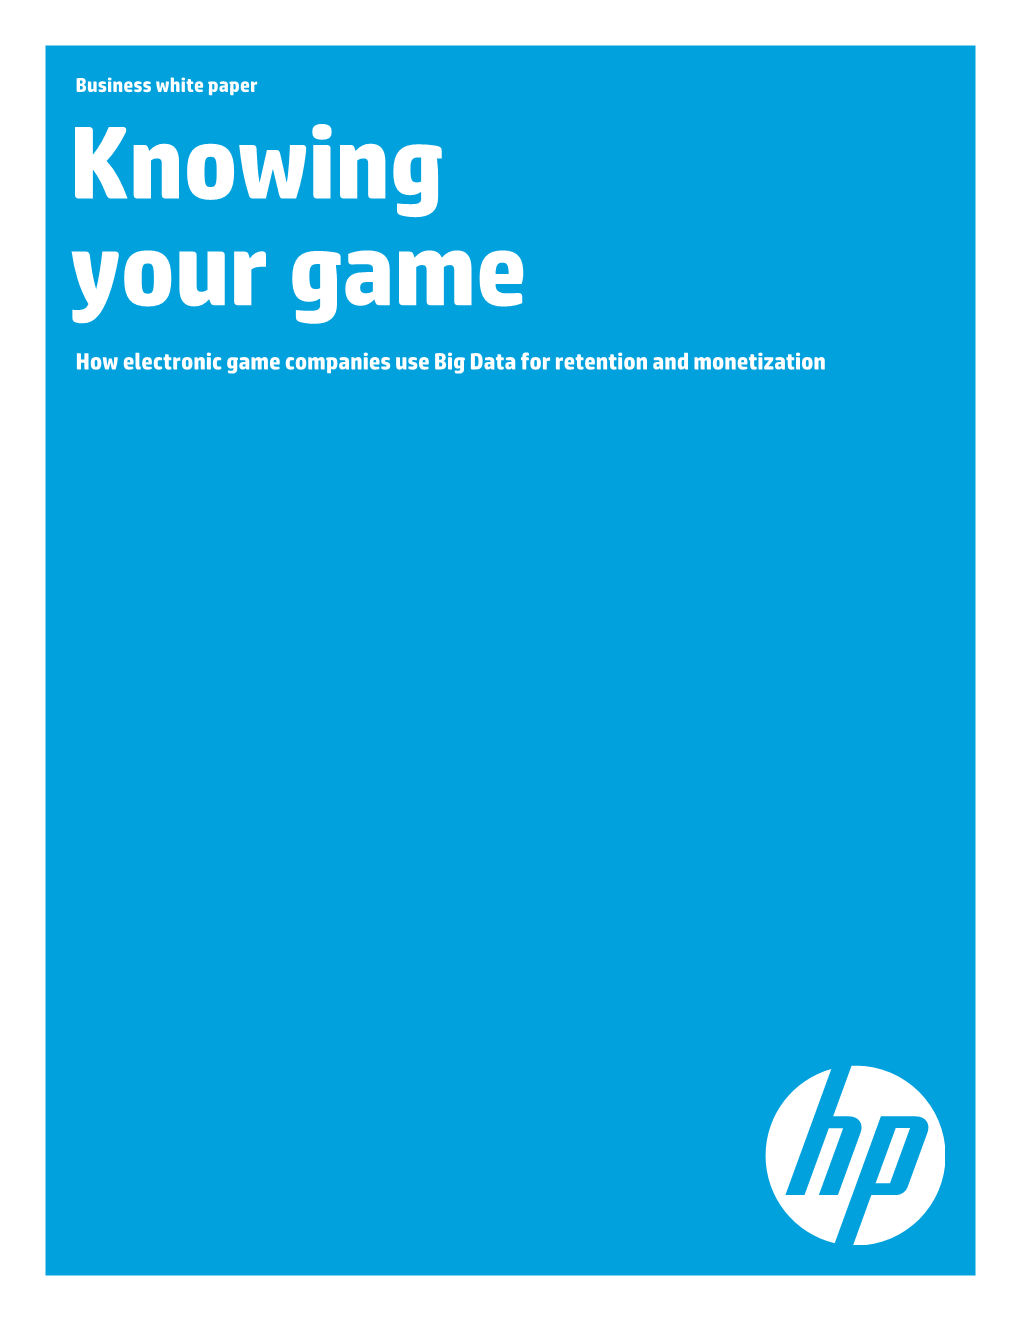 Knowing Your Game: How Electronic Game Companies Use Big Data For